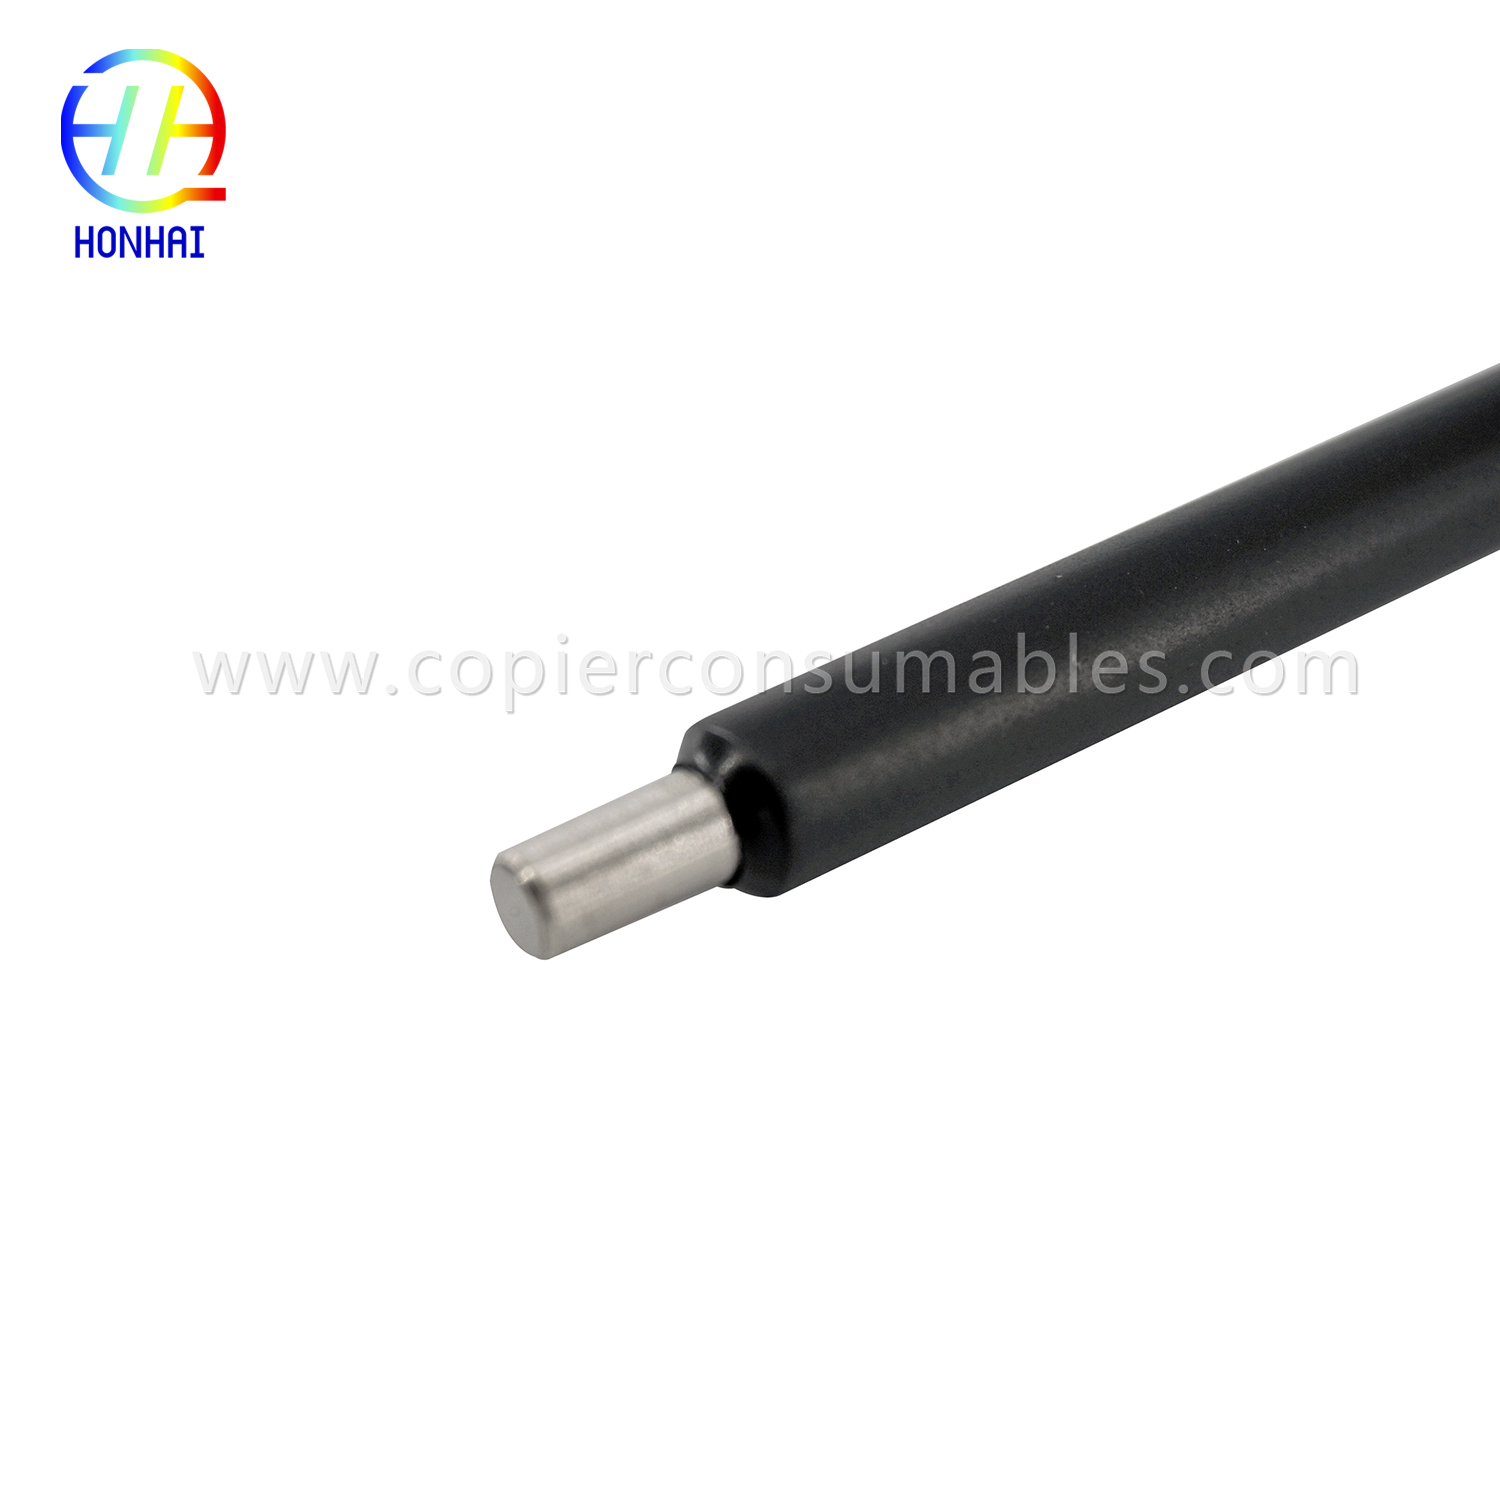 HP 1215 1515 1510 အတွက် Primary Charge Roller (11) 拷贝